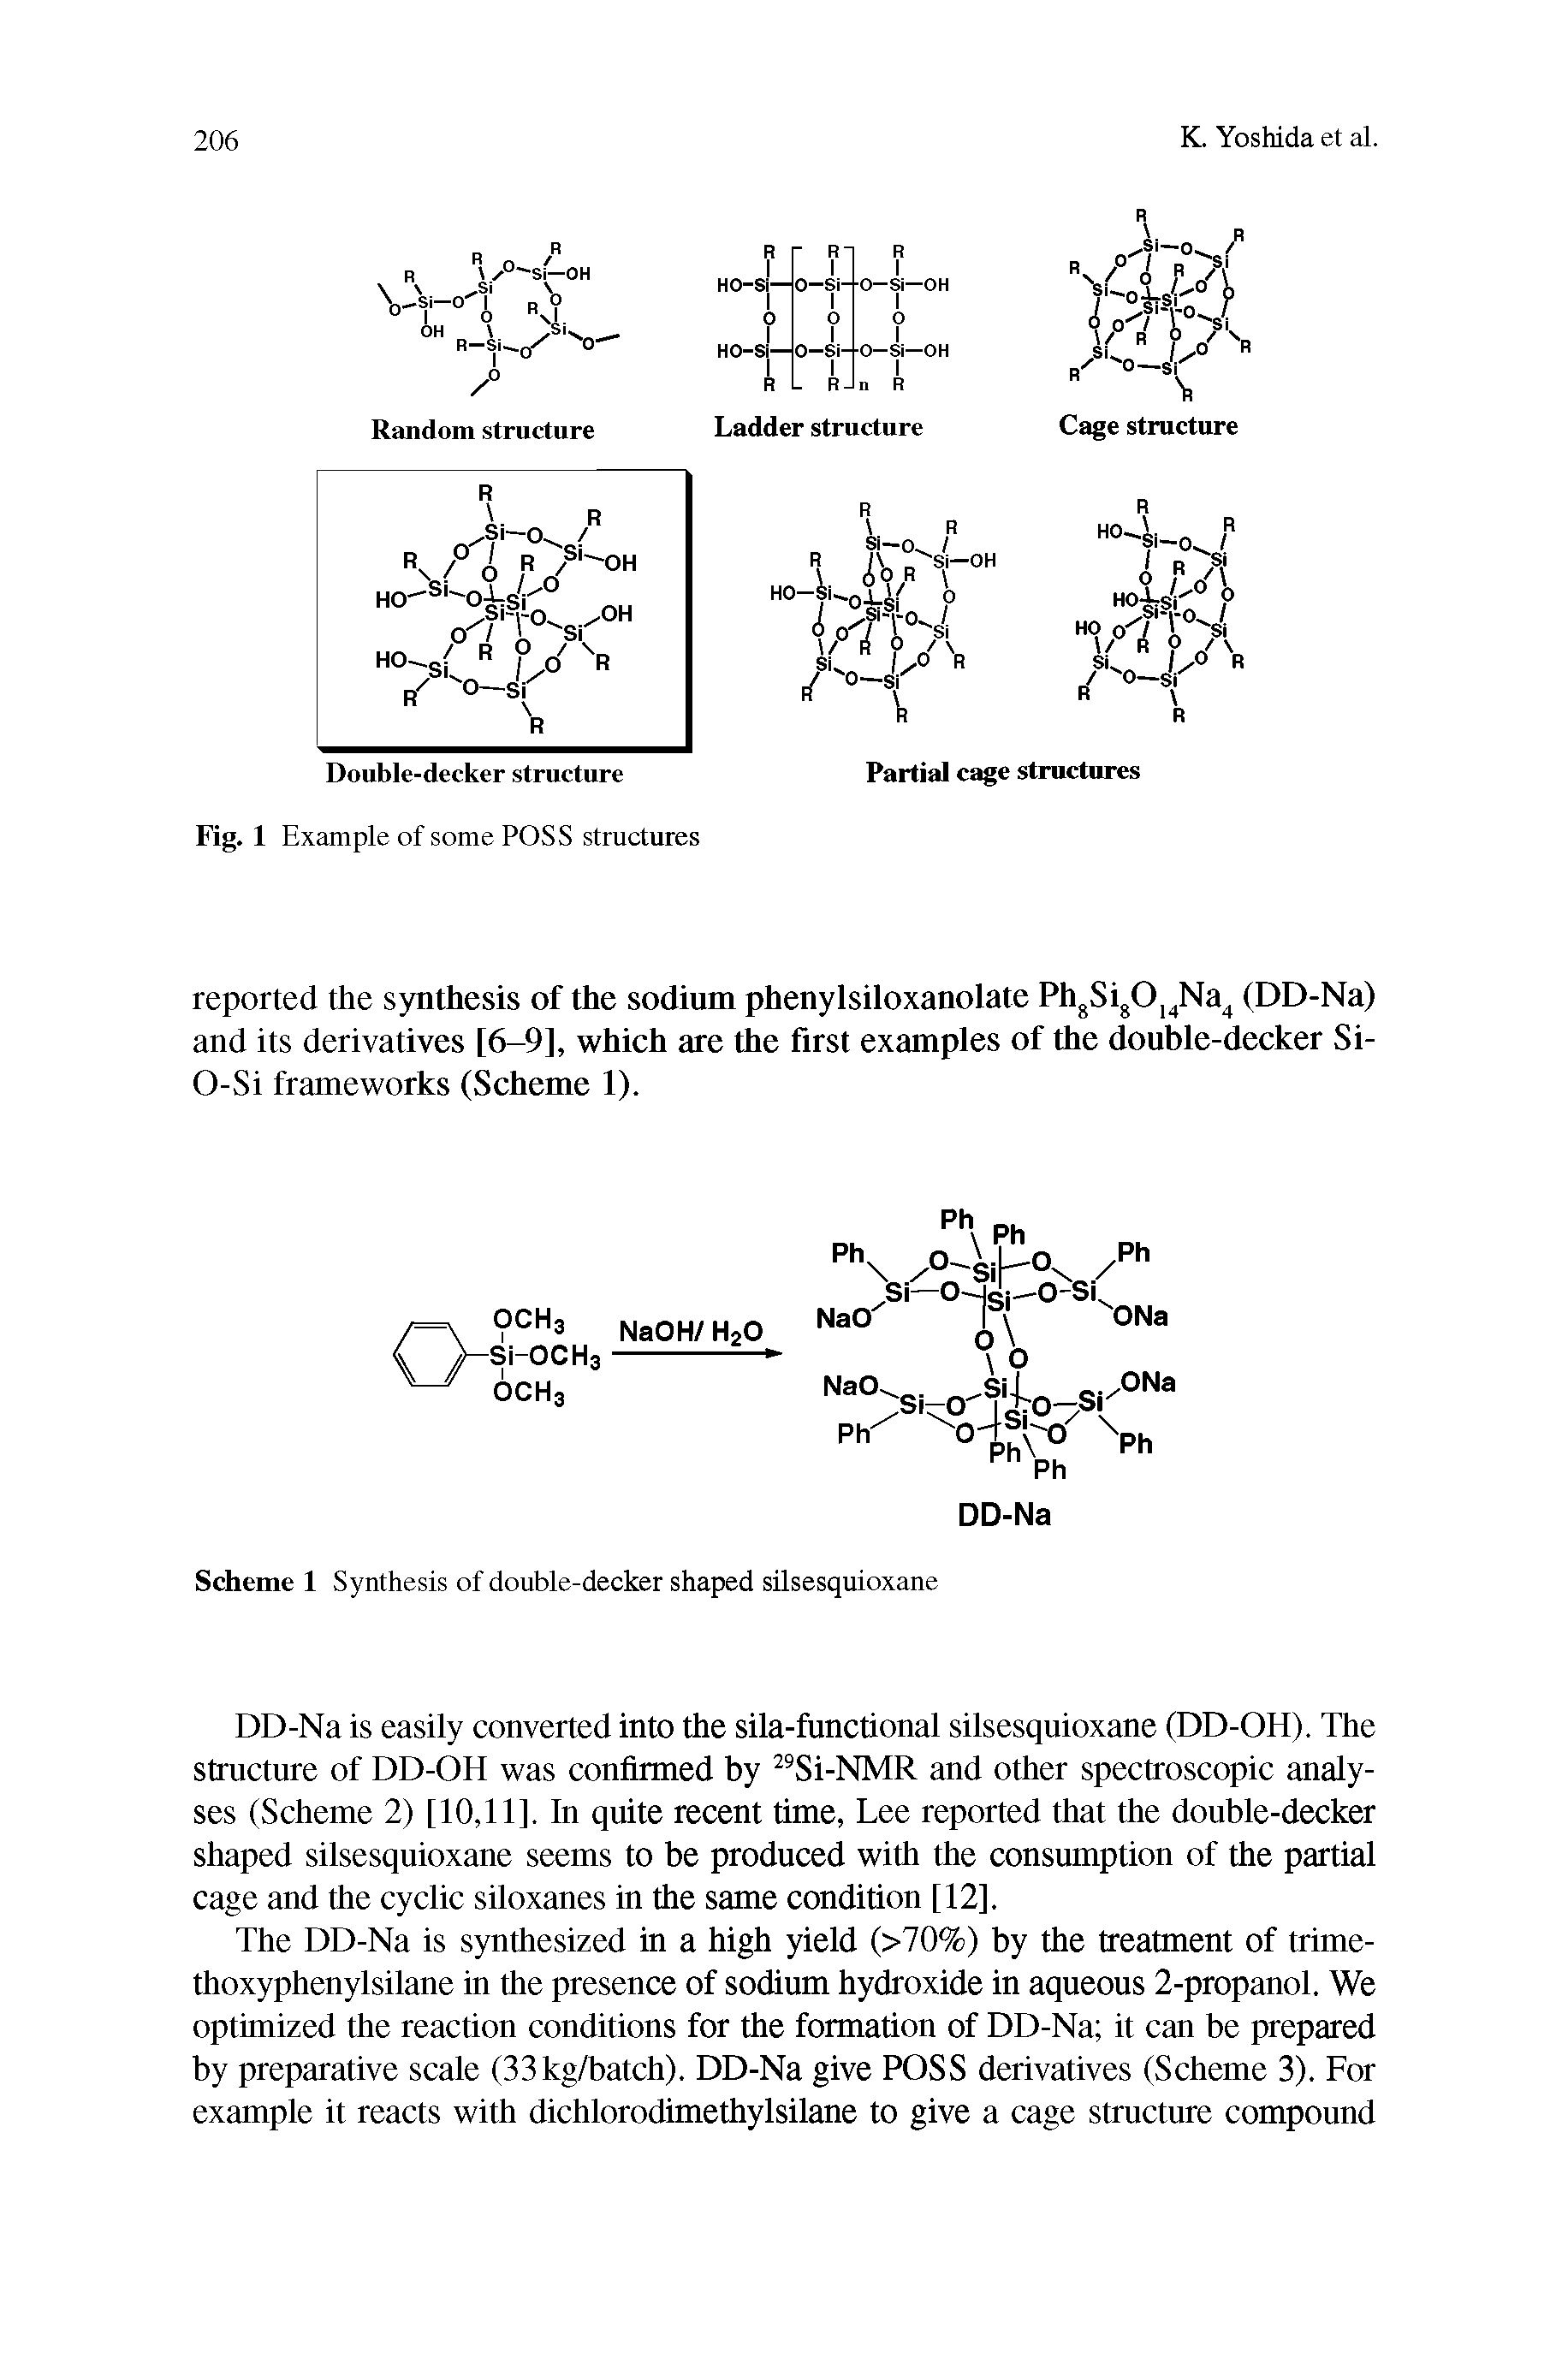 Scheme 1 Synthesis of double-decker shaped silsesquioxane...